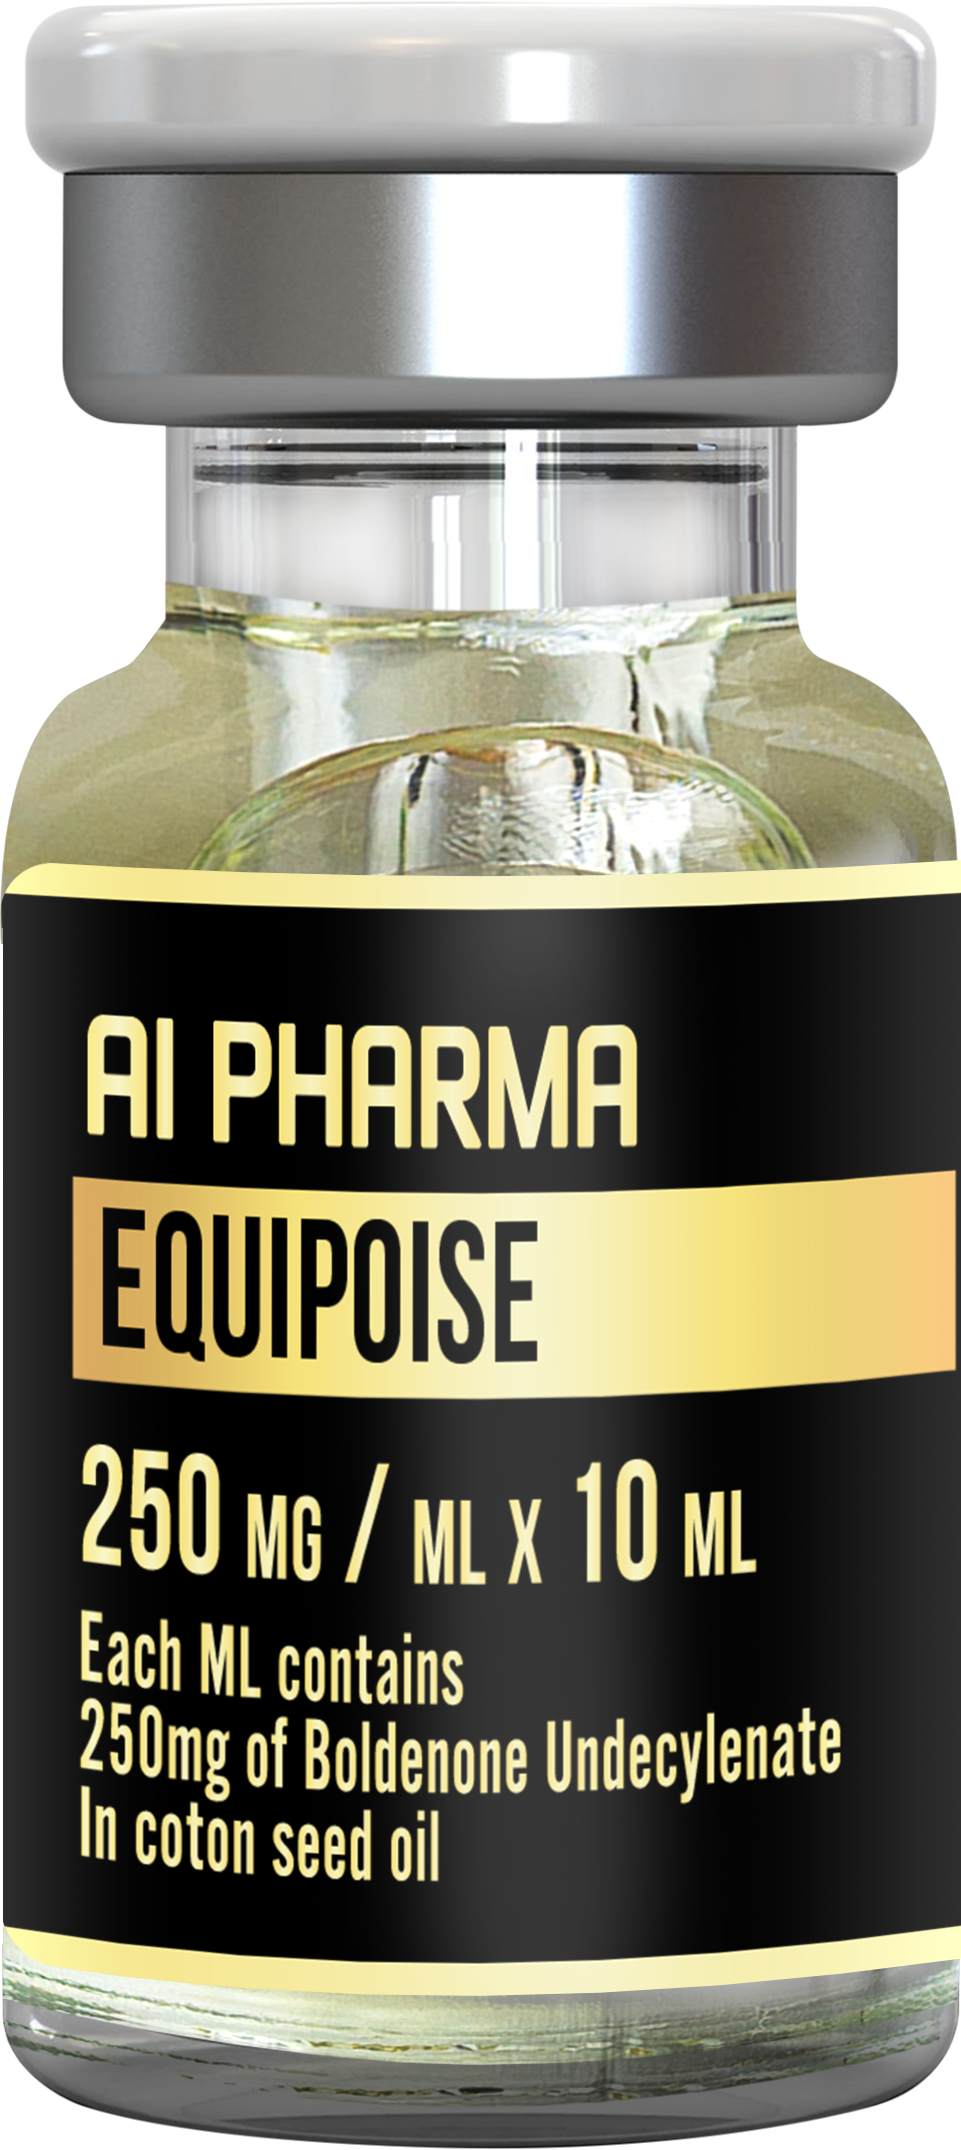  Equipoise - Welcome To Canadian Steroid Central